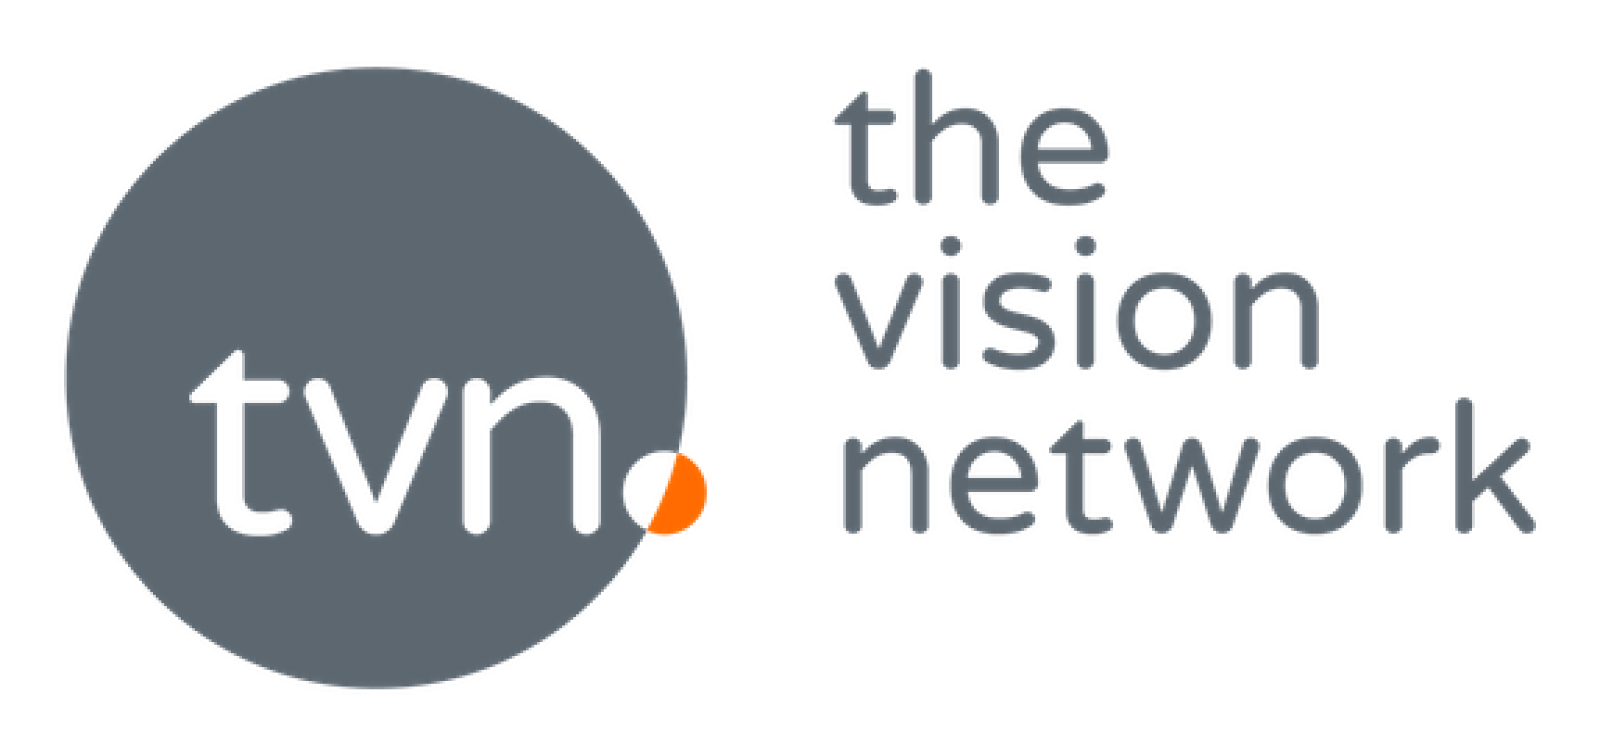 The Vision Network: a new partnership for Neuralya